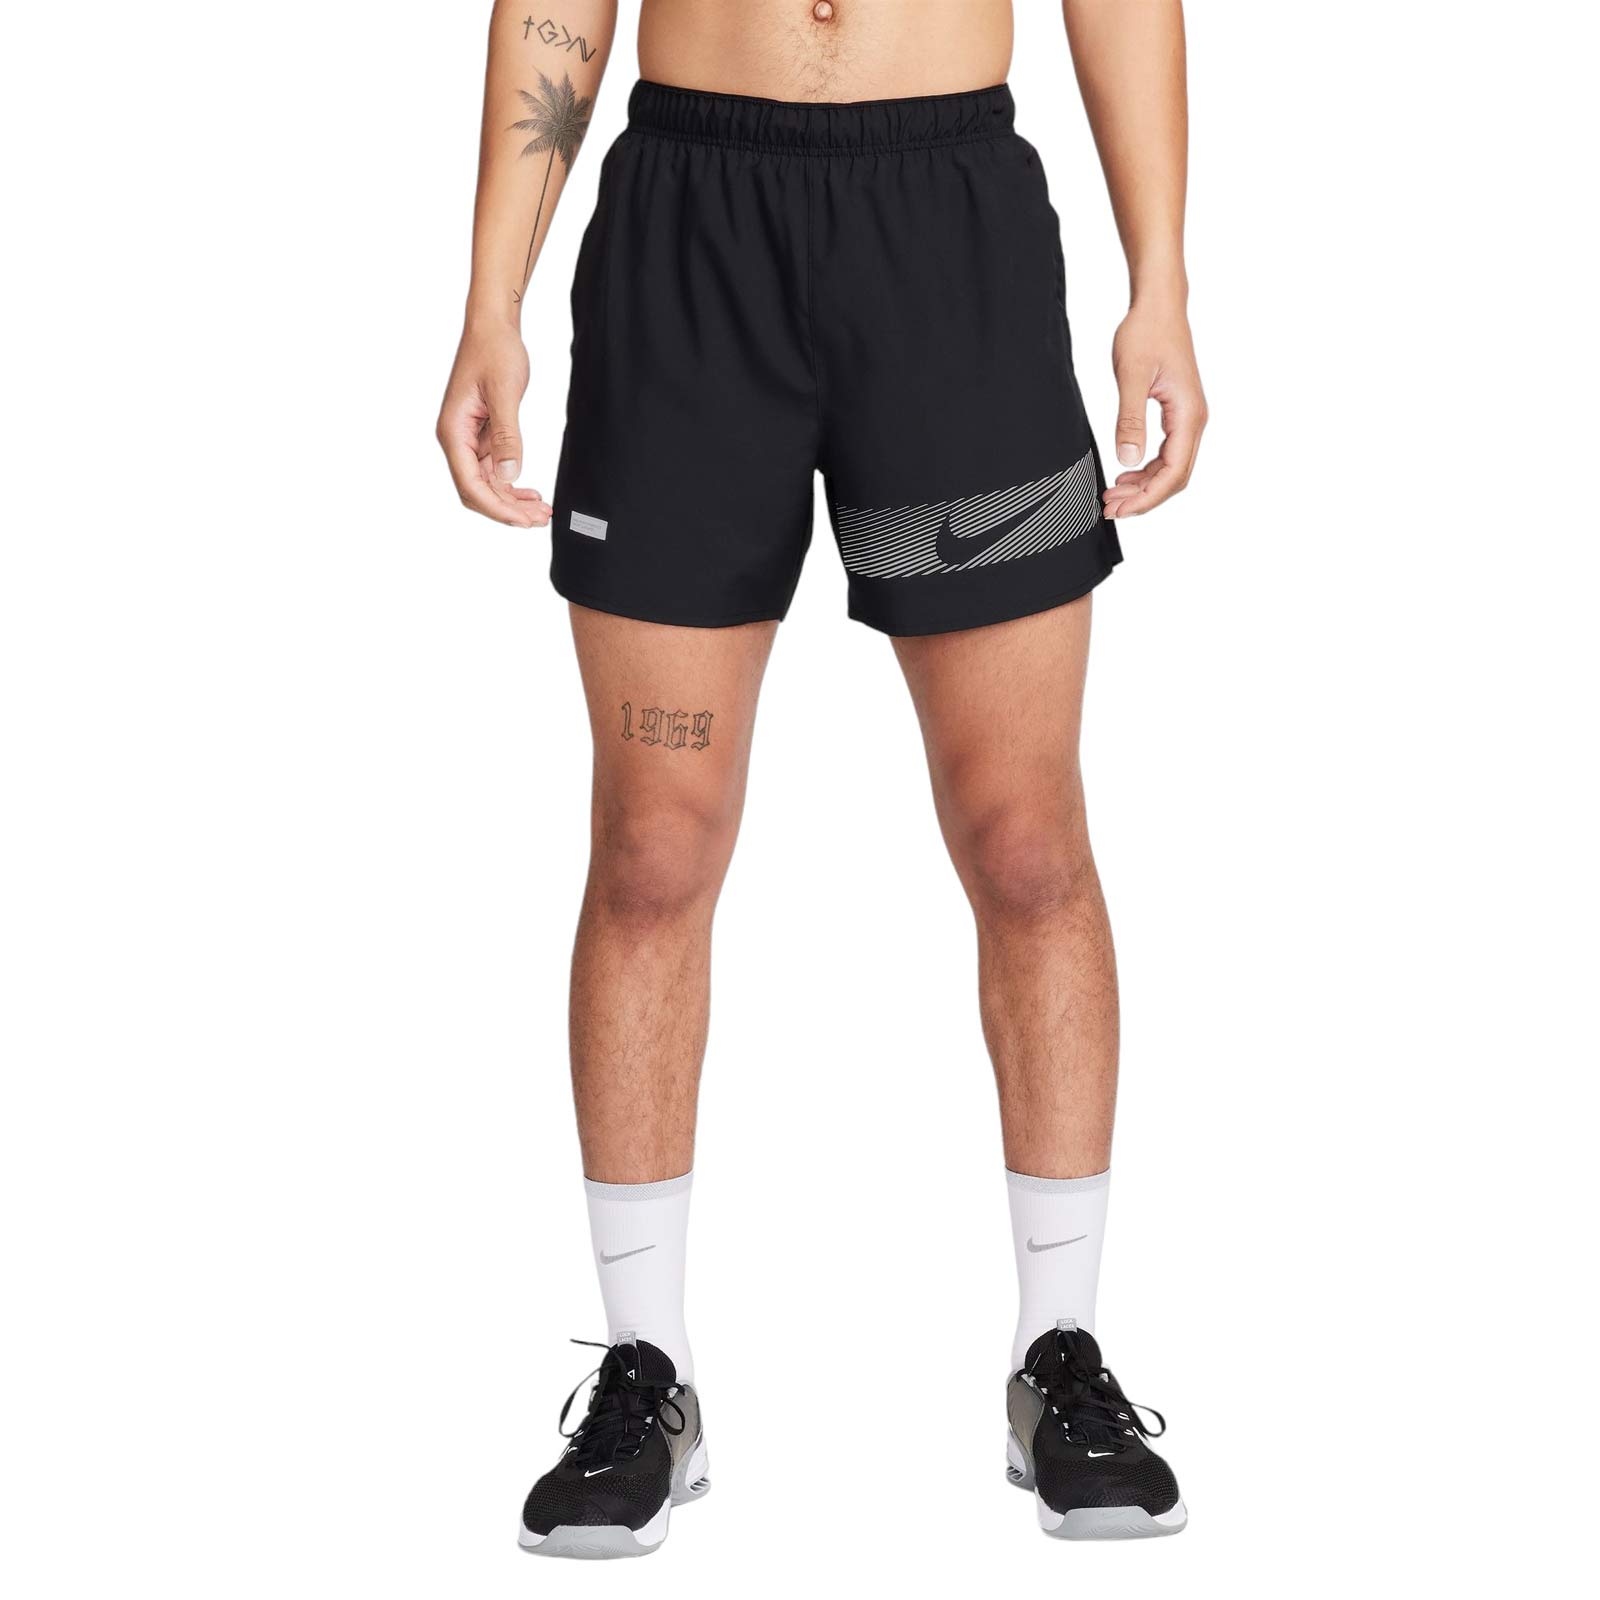 NIKE CHALLENGER FLASH MENS DRI-FIT 5" BRIEF-LINED RUNNING SHORTS